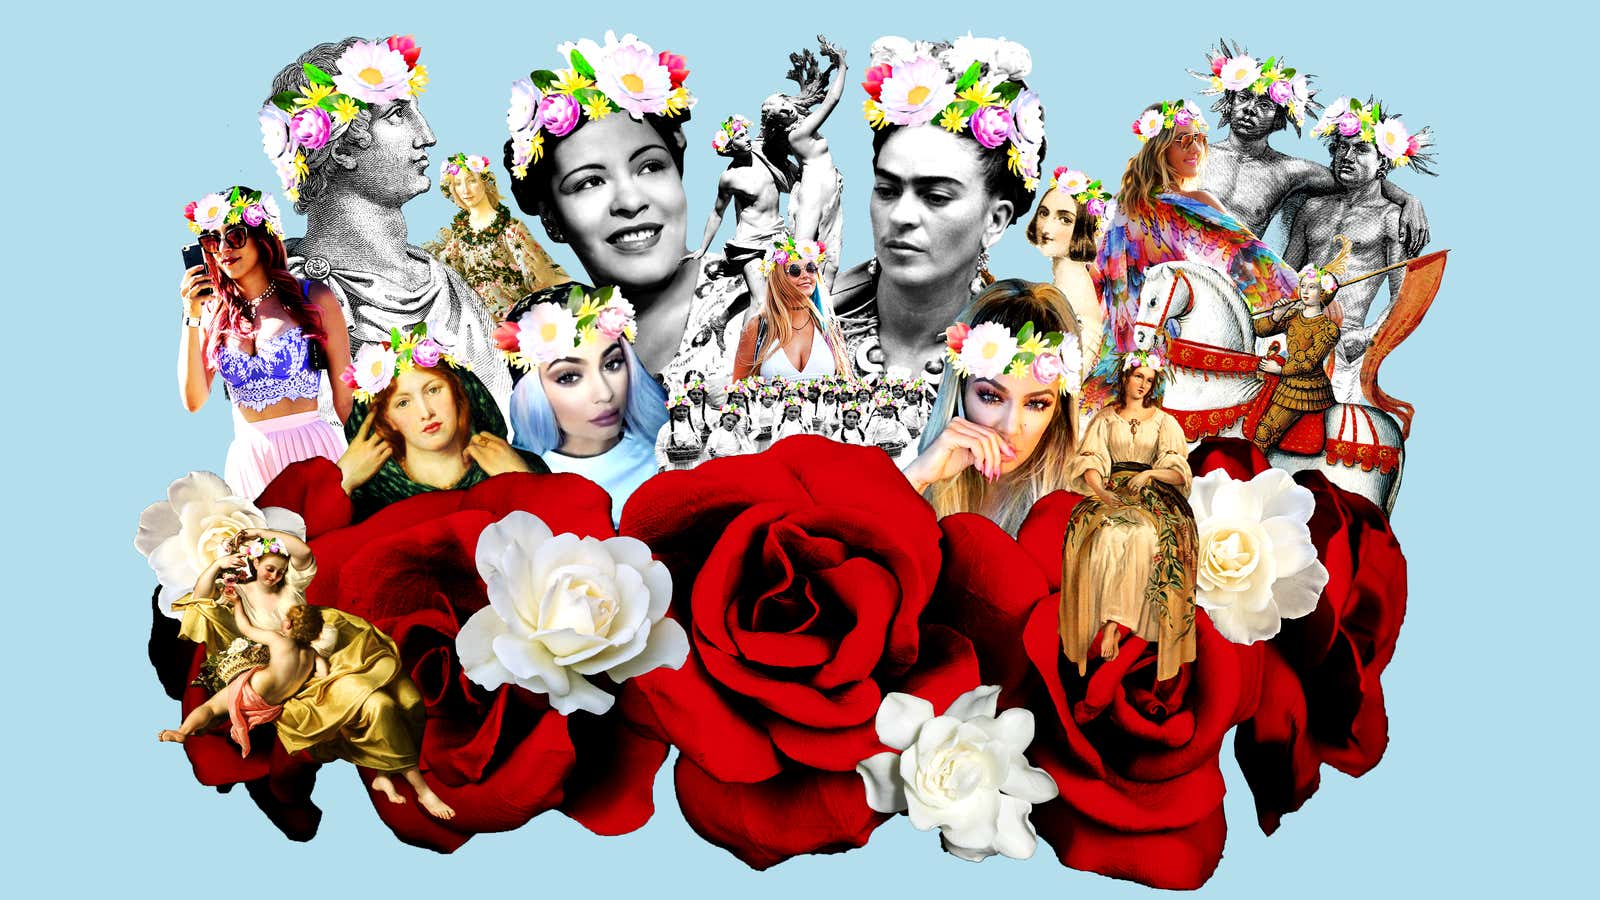 From the Greeks to Instagram: The Secret History of the Flower Crown